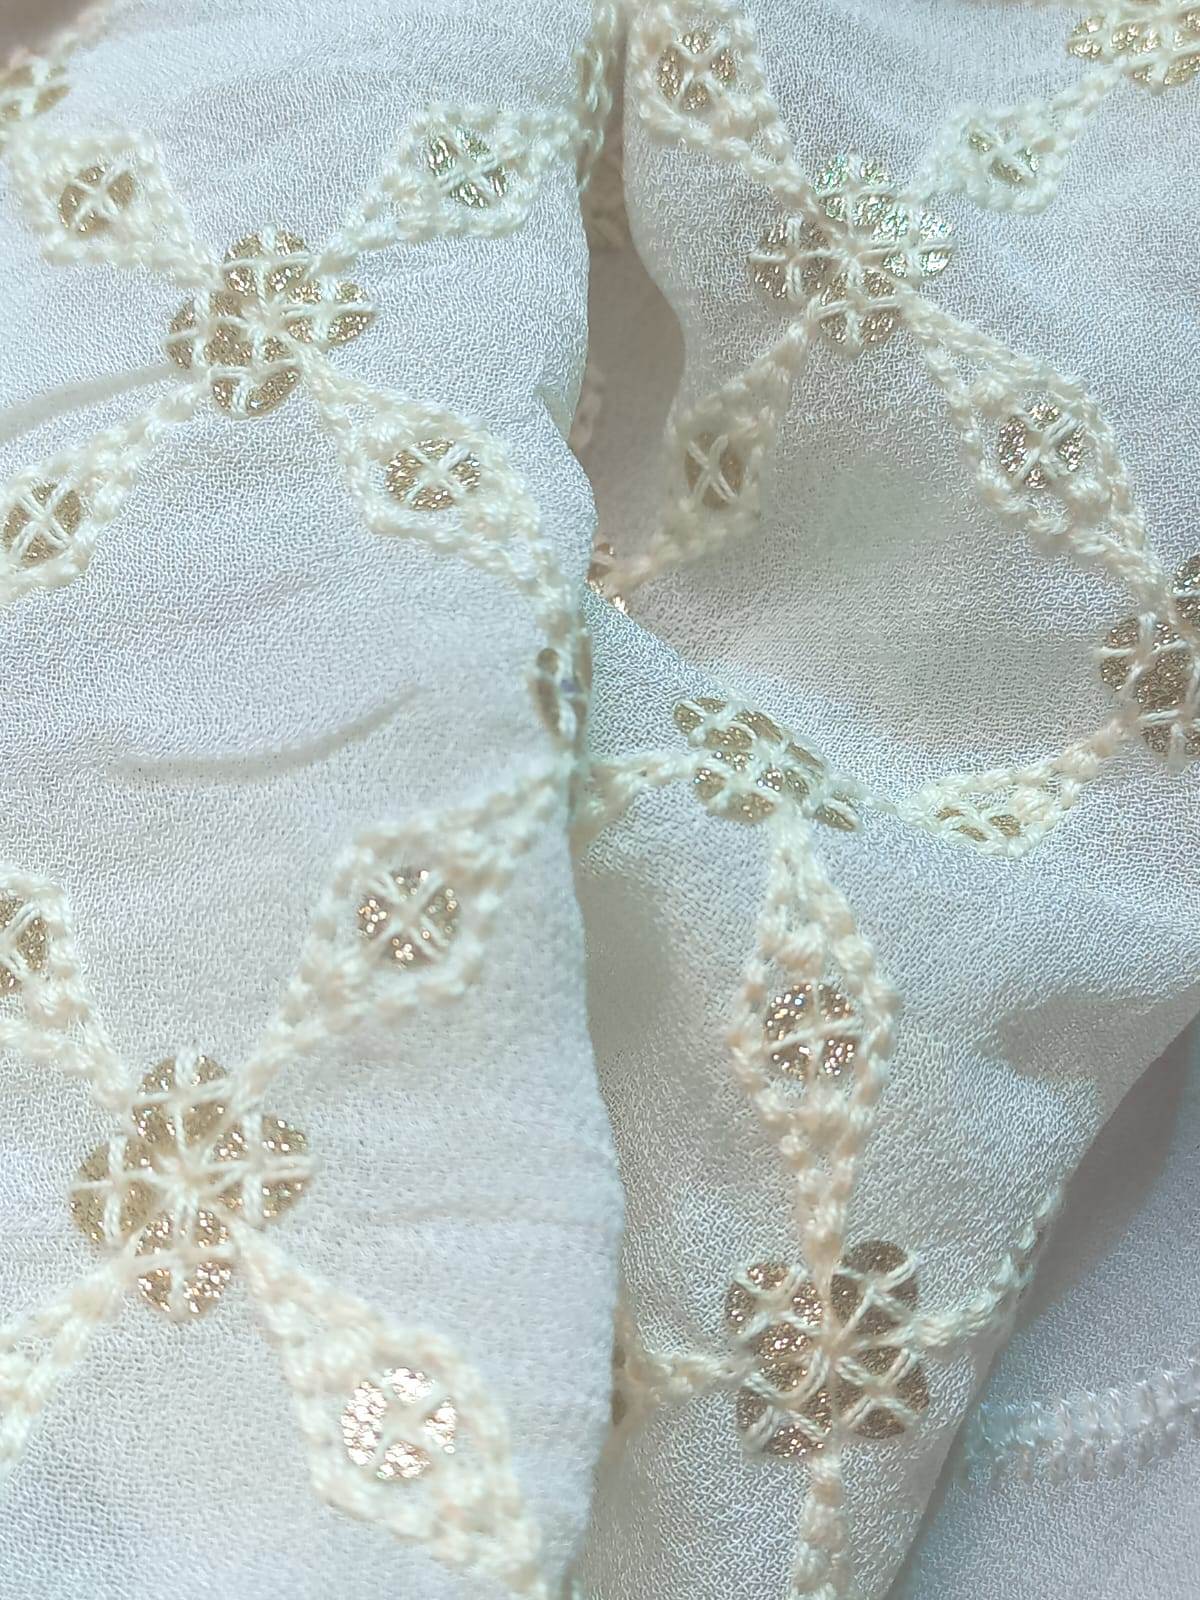 Schiffli embroidery fabric with thread work and glitter online